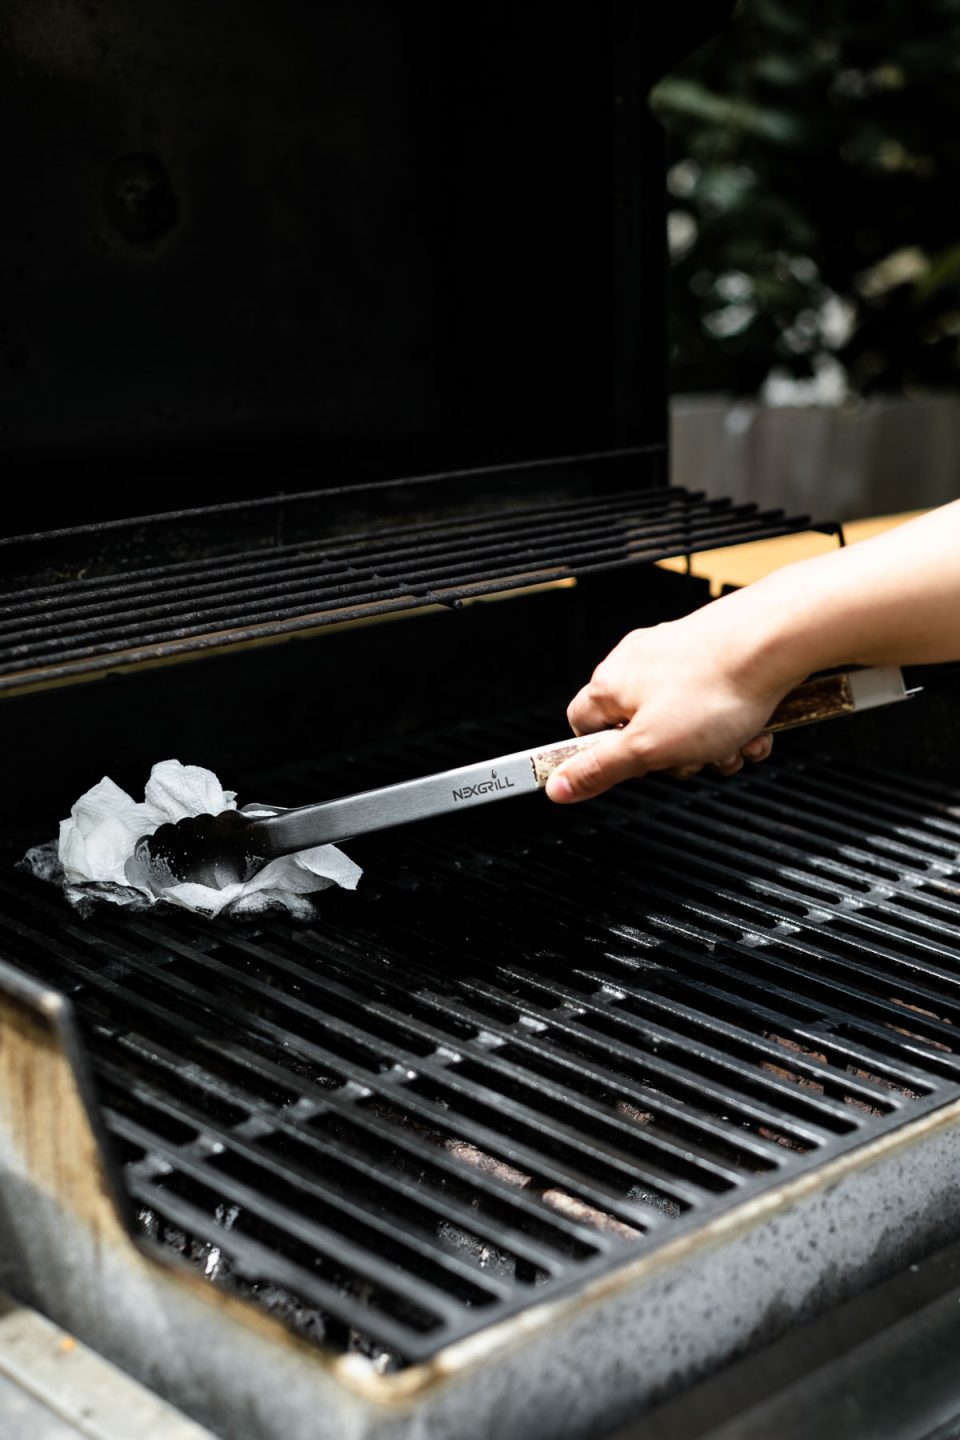 Preparing the grill to grill turkey burgers. A woman's hand reaches into the photo with grill tongs holding lightly greased paper towel to grease the grill grates of a gas grill.